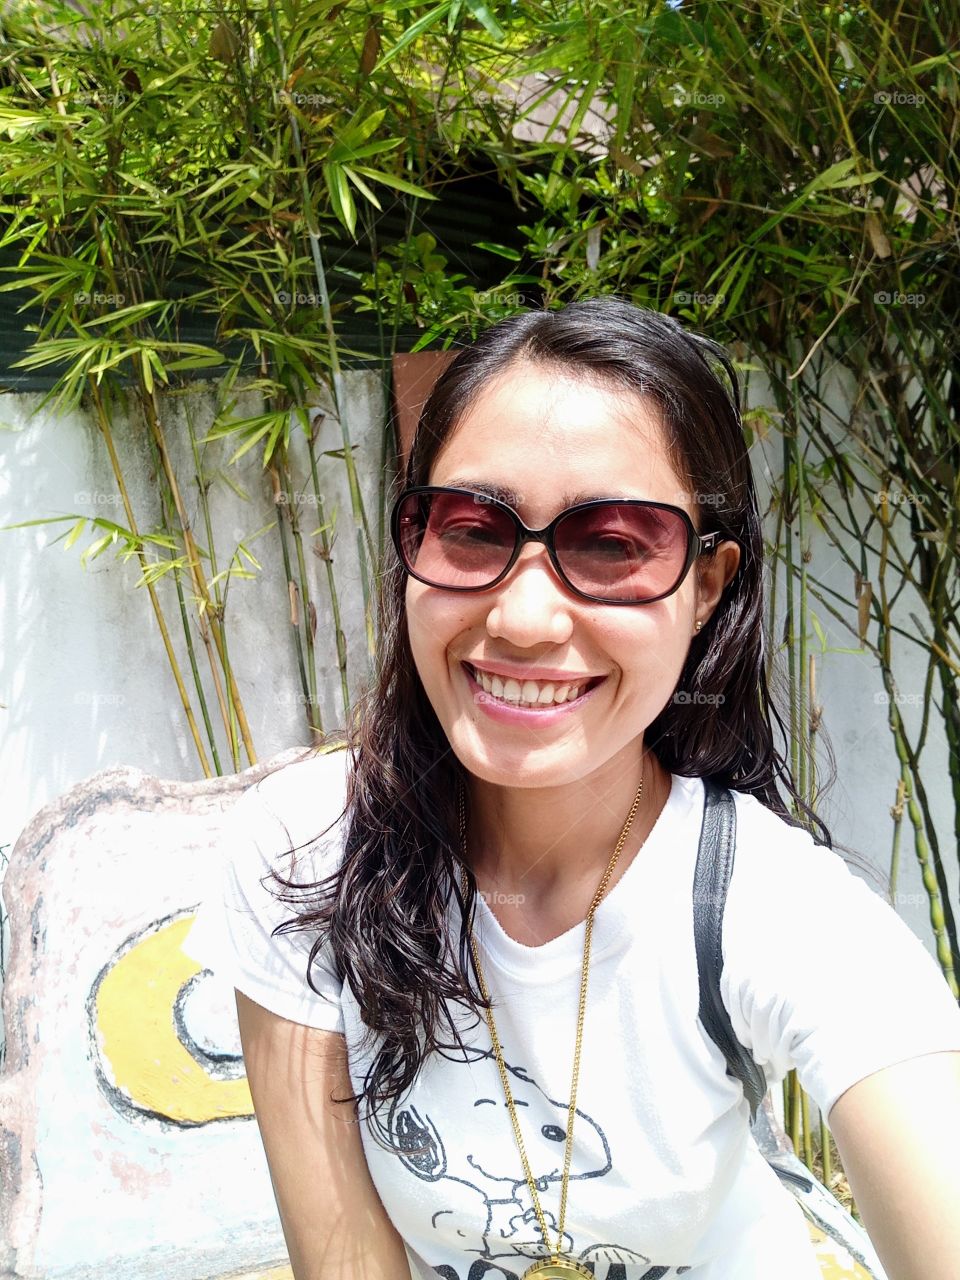 A woman smiling wearing sunglasses, white shirt, with bamboo and wall background. 